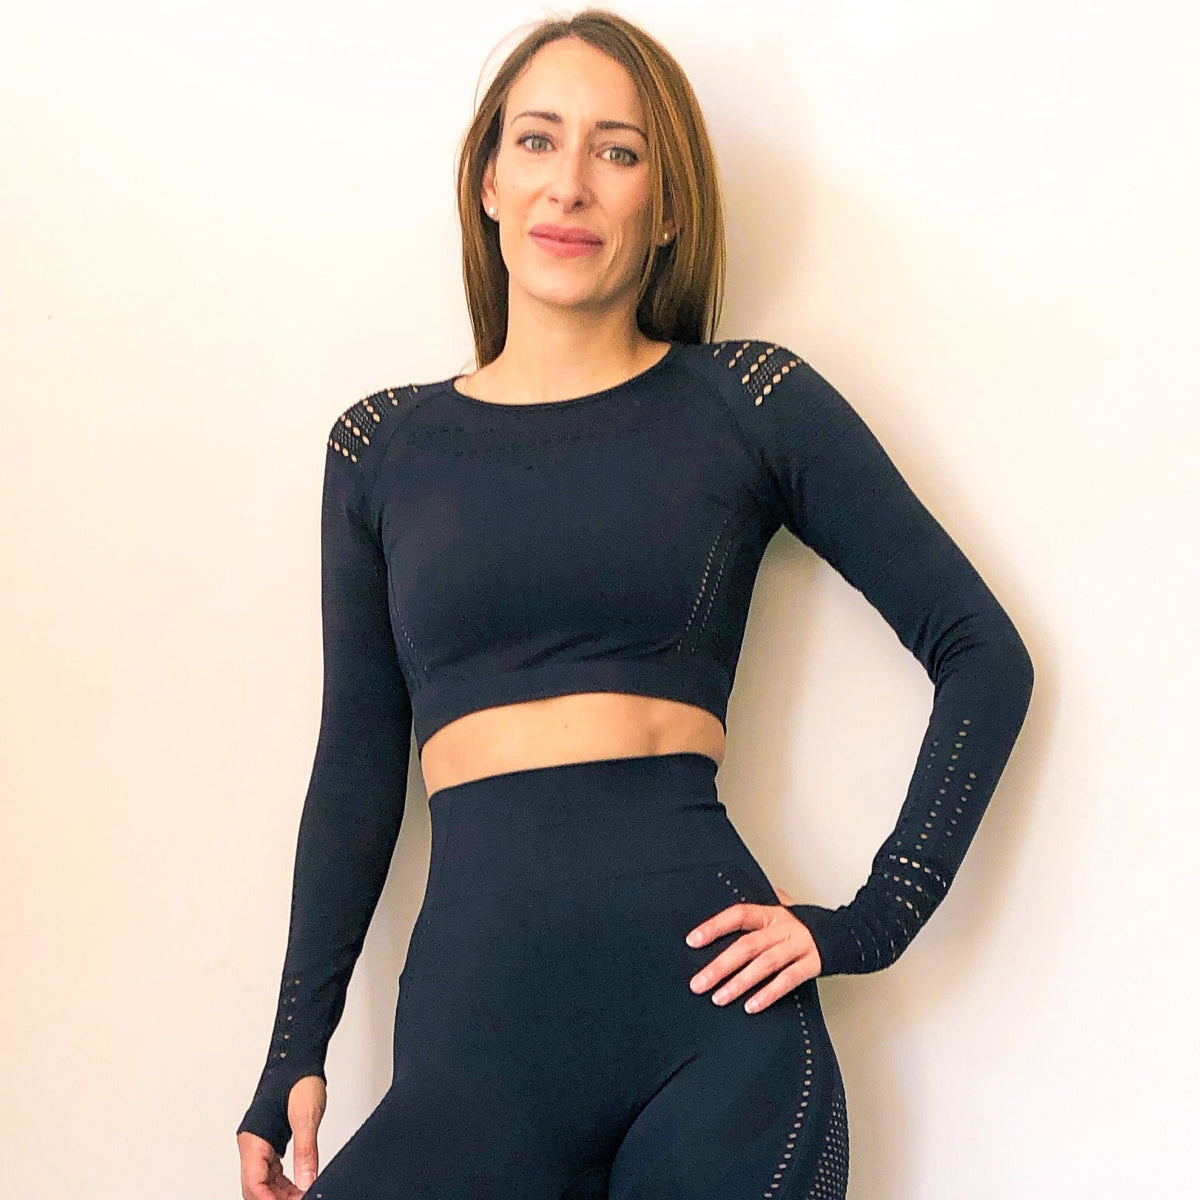 Mesh Performance Crop Top by Stylish AF Fitness Co